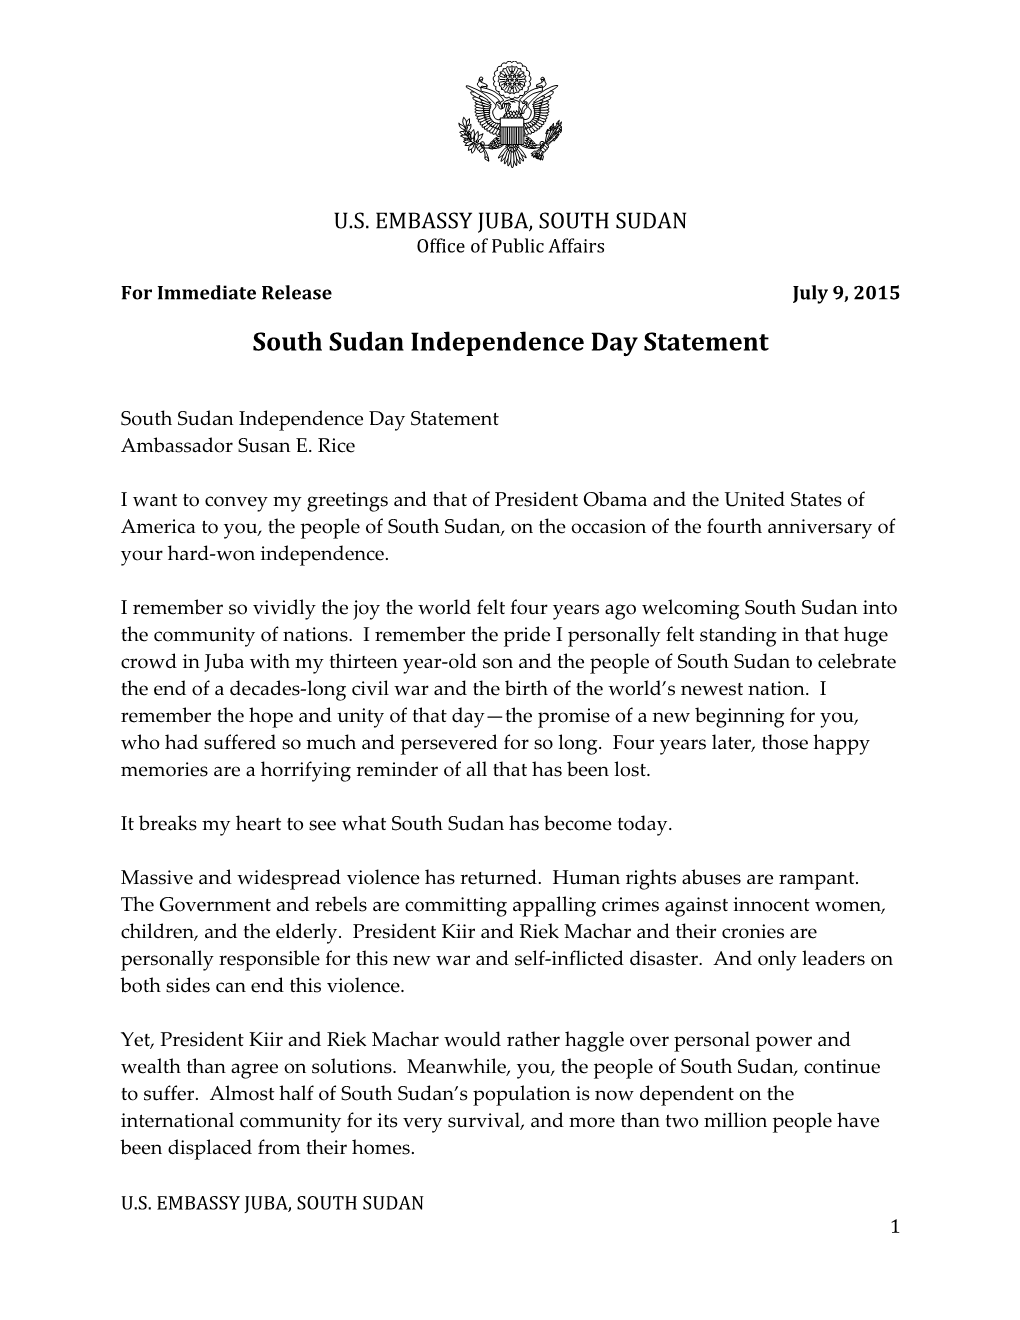 South Sudan Independence Day Statement